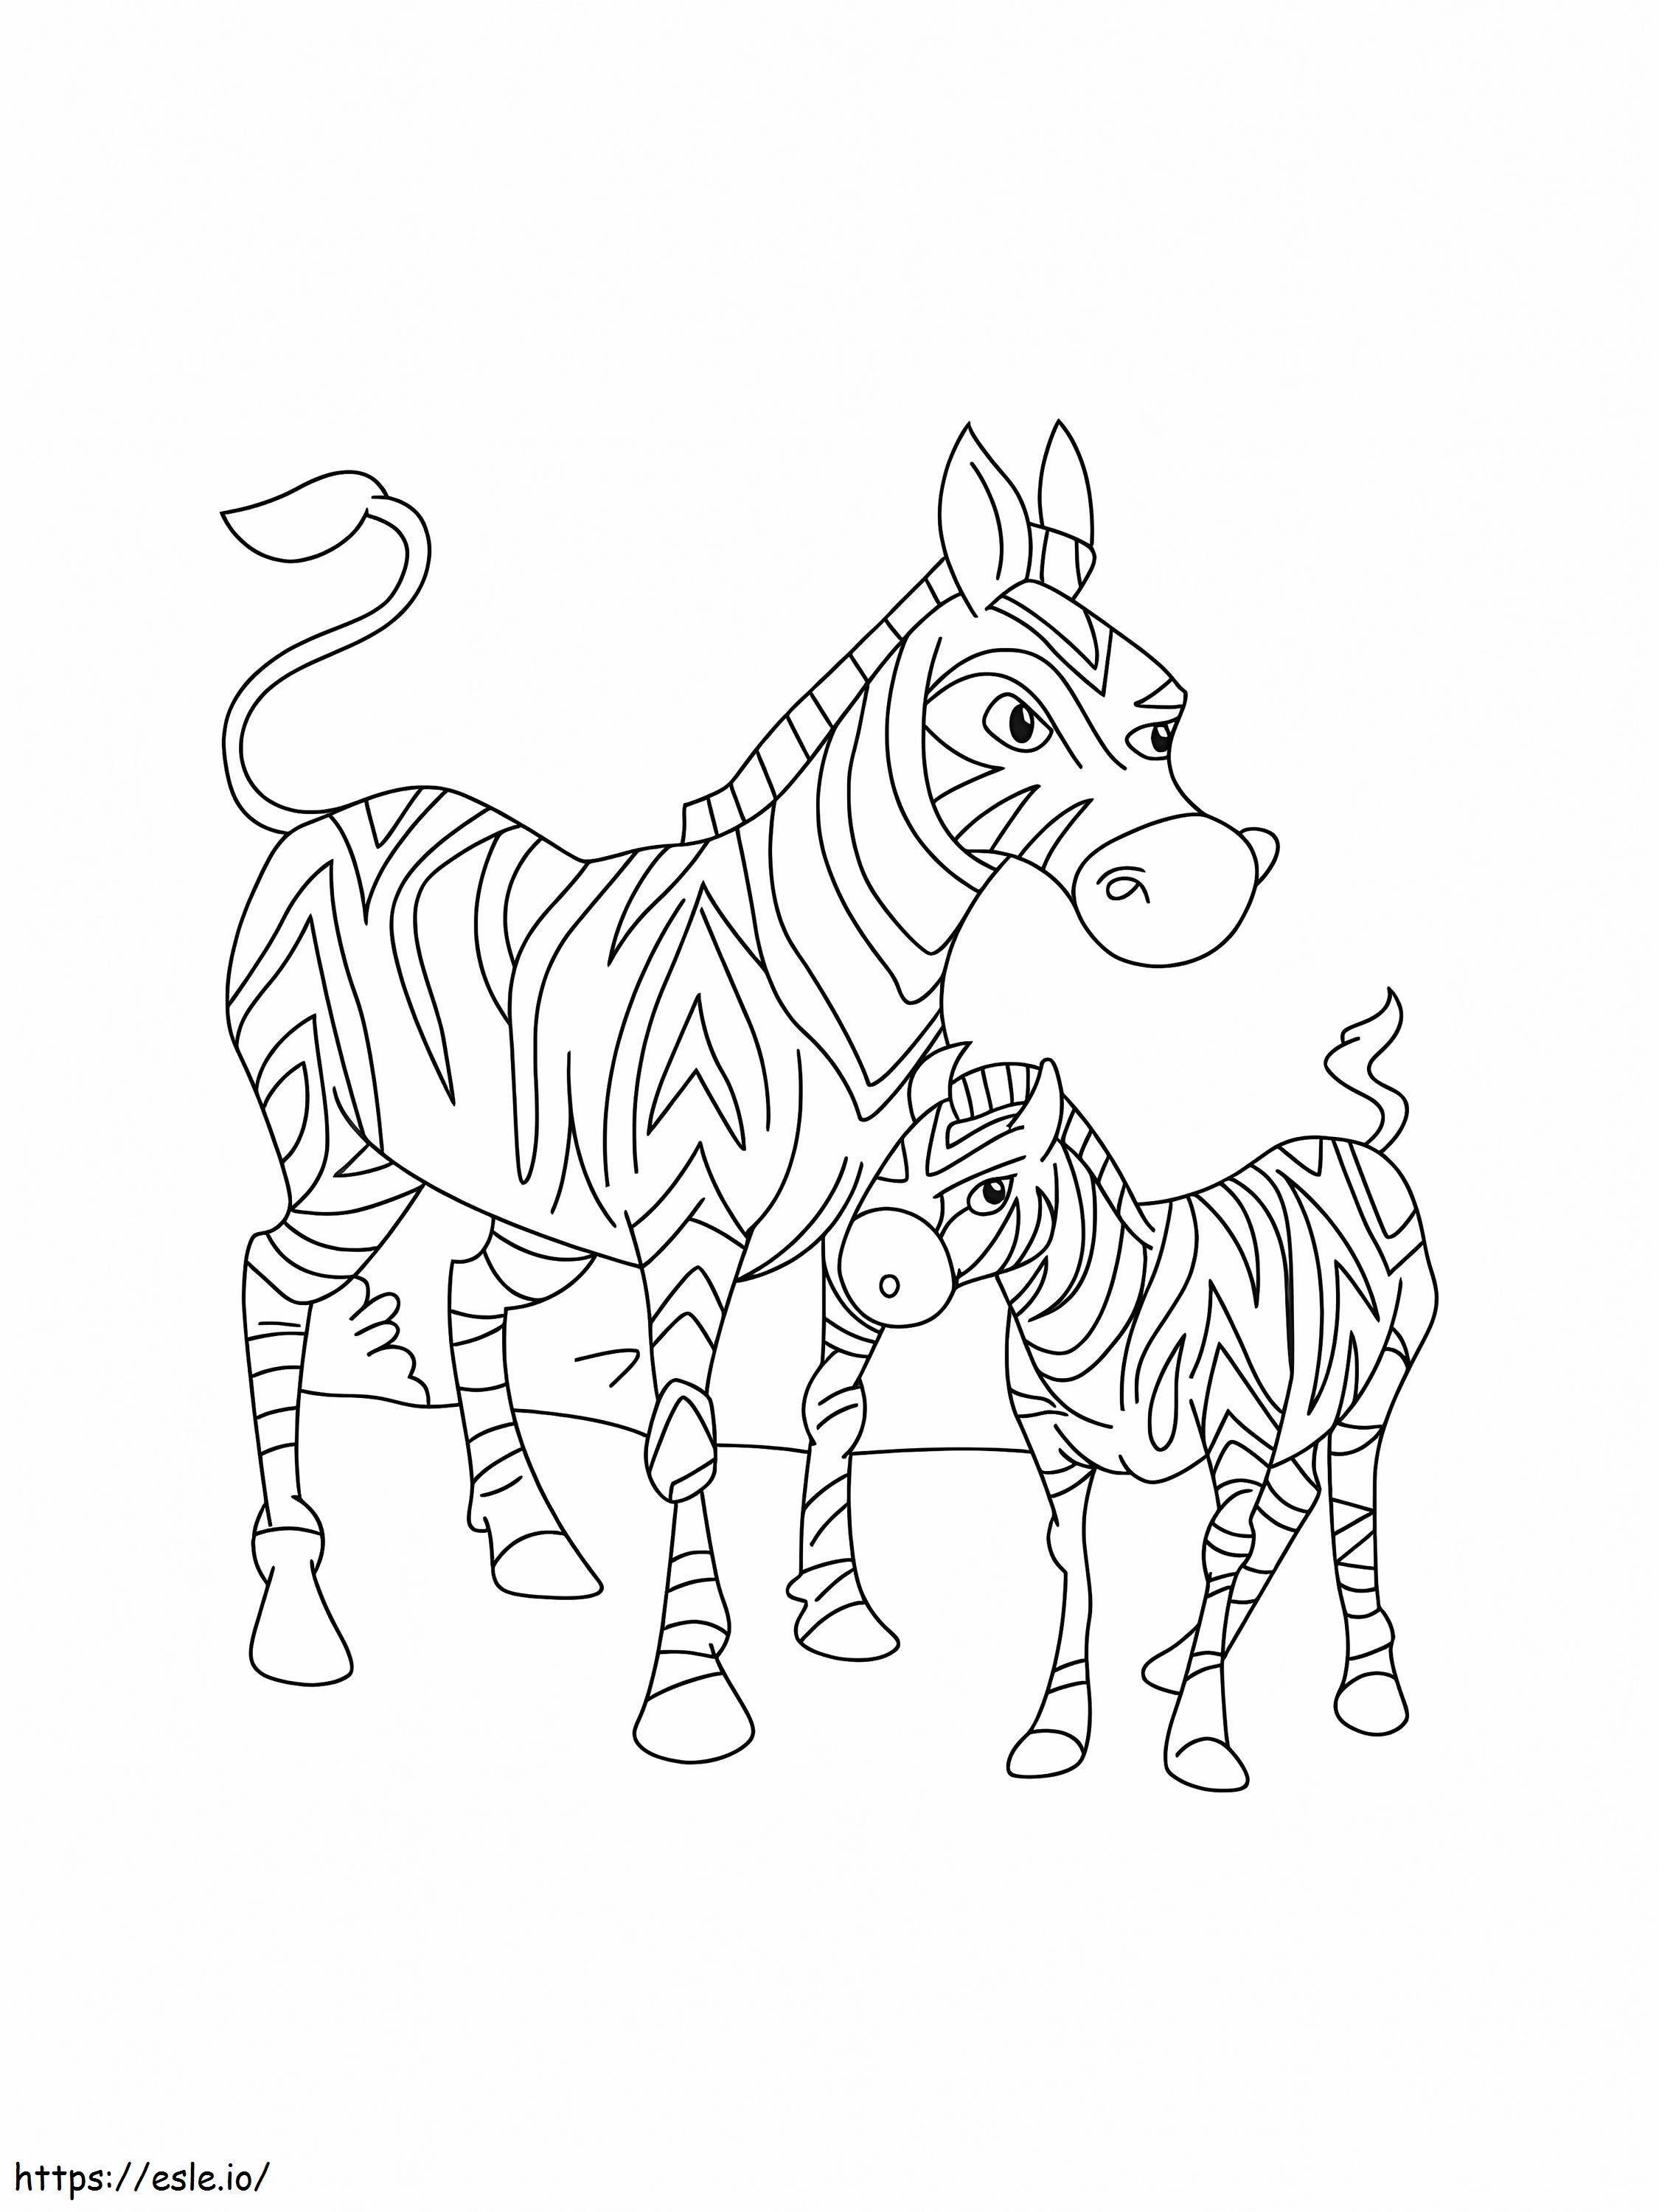 Basic Zebra Mother And Baby Zebra coloring page